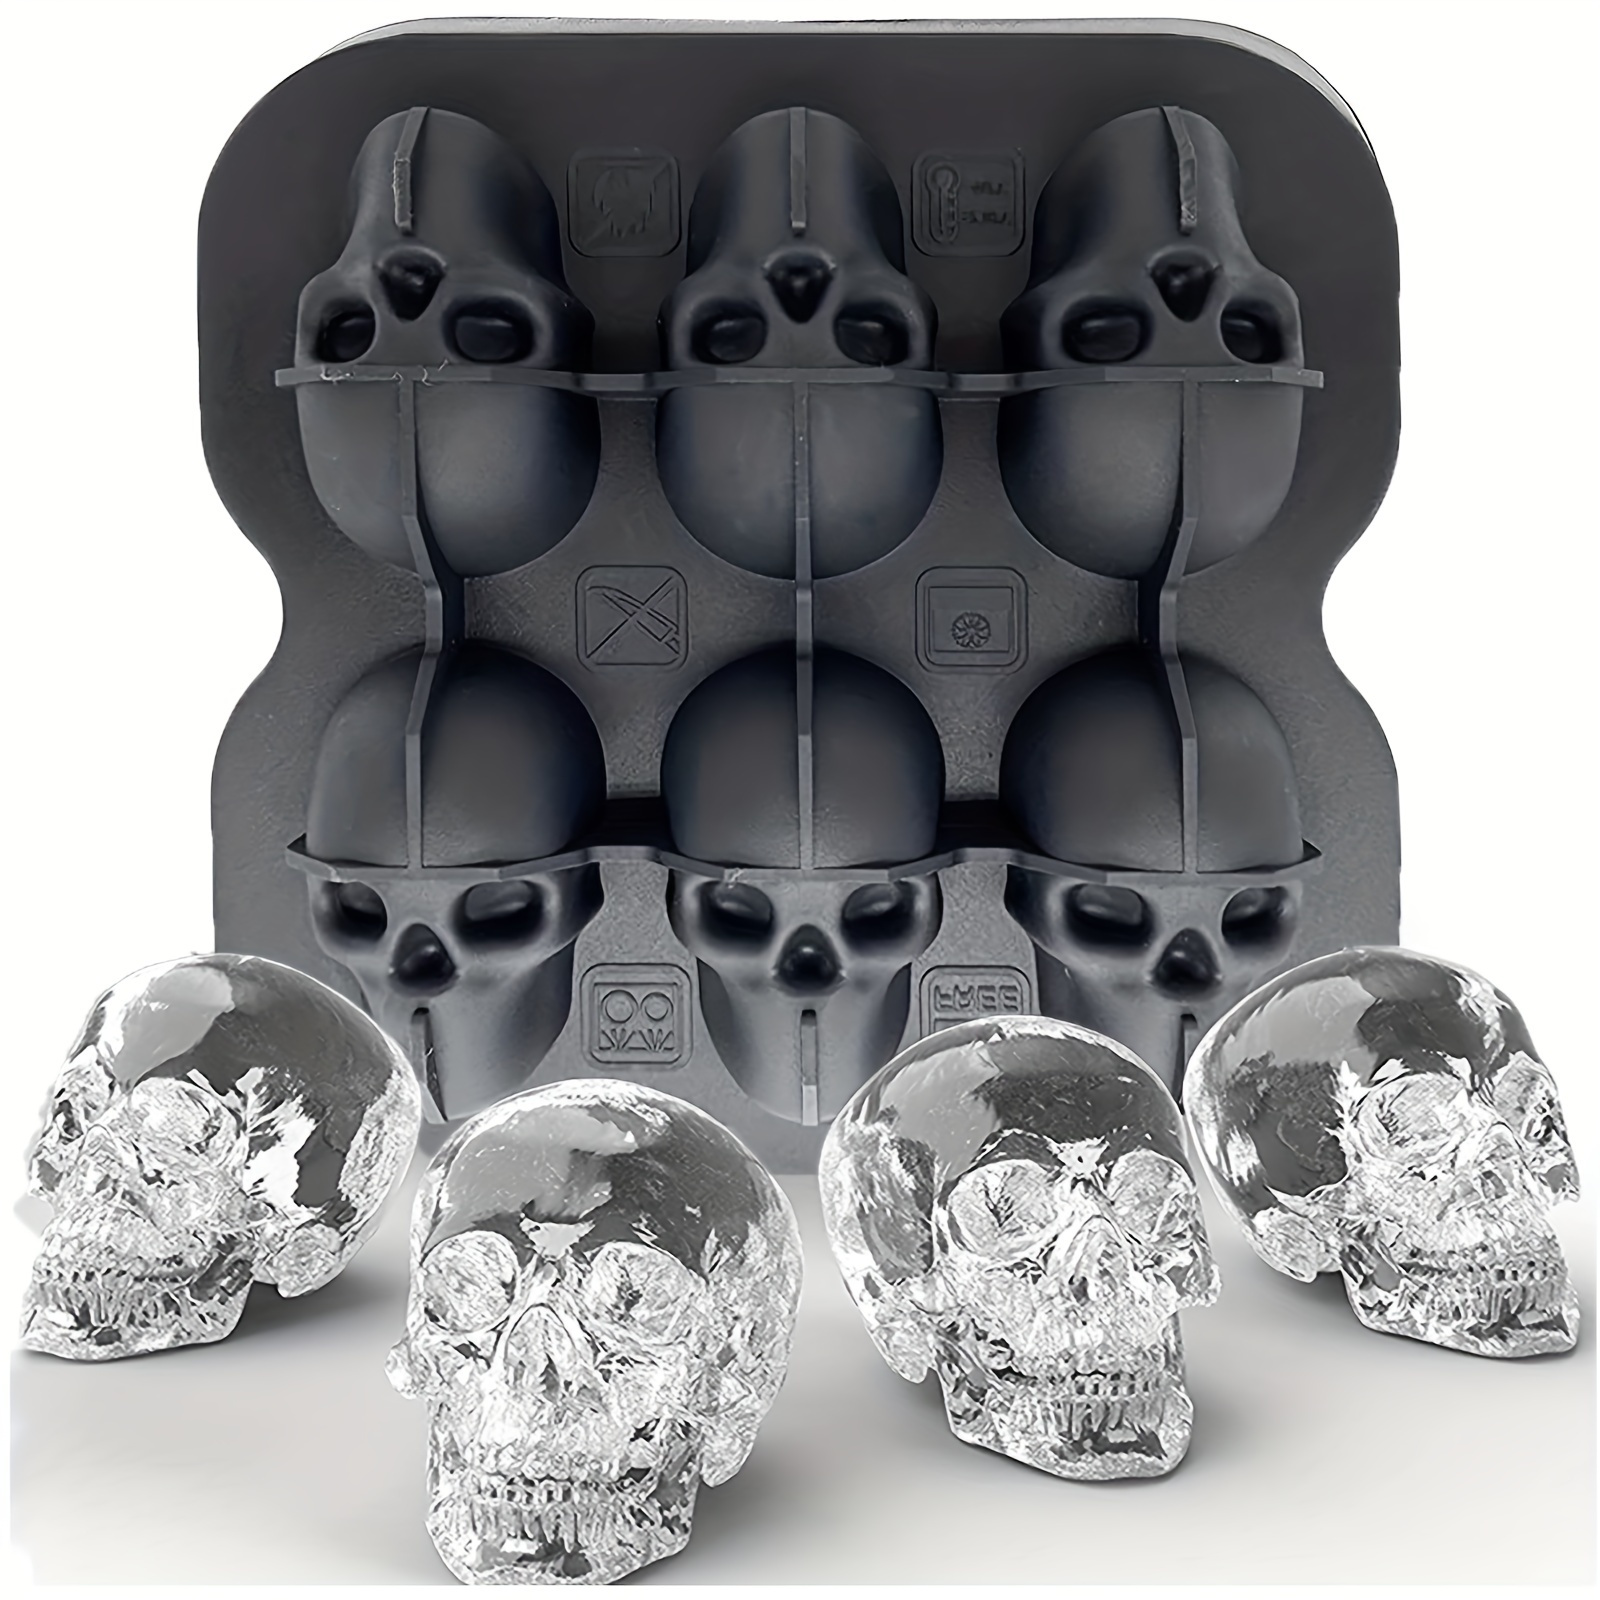 Skull Ice Molds - Set of 2 - Ideal for Whiskey - ApolloBox